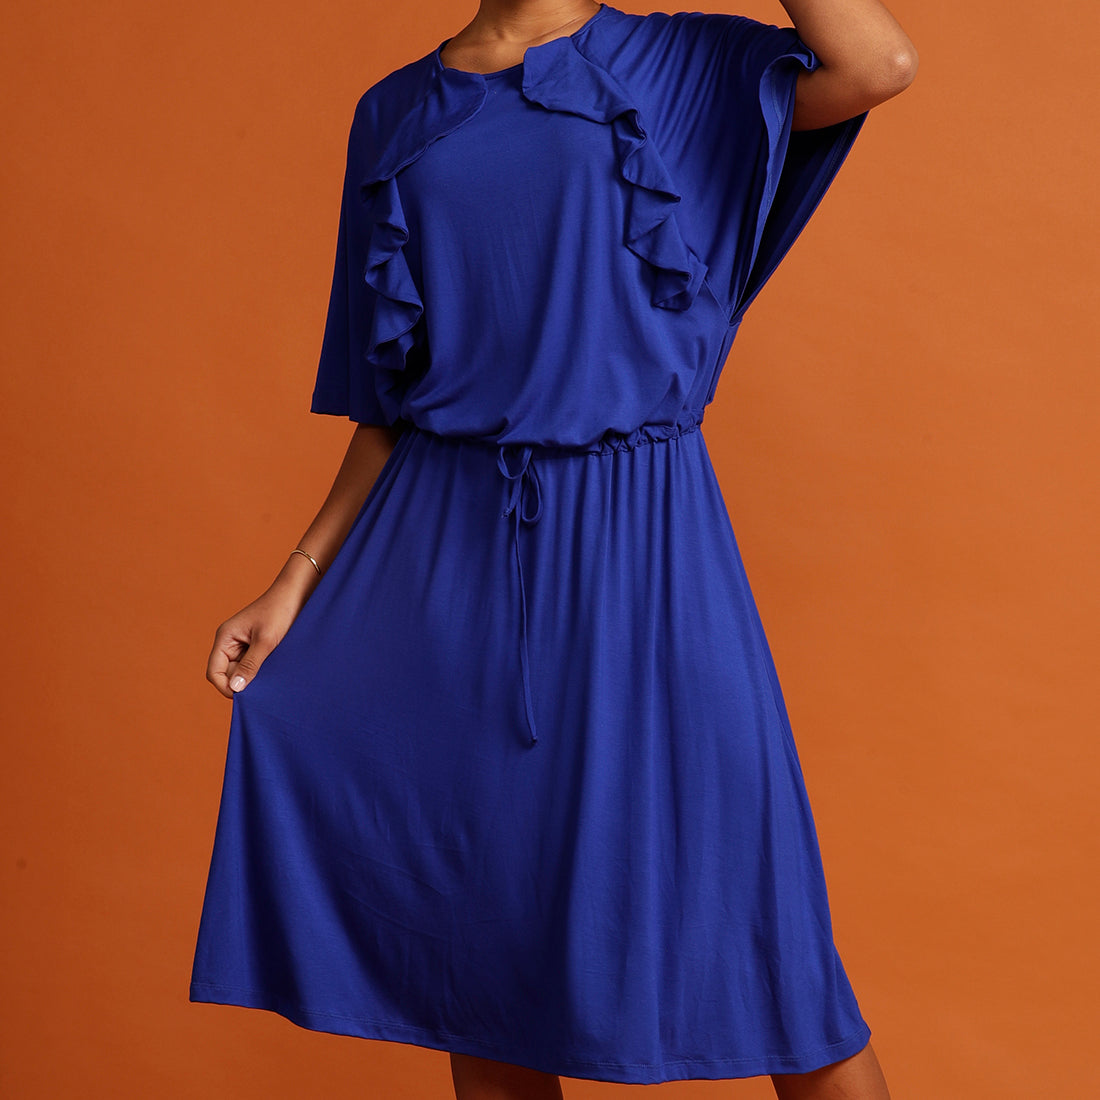 Close up royal blue dress with ruffle detail